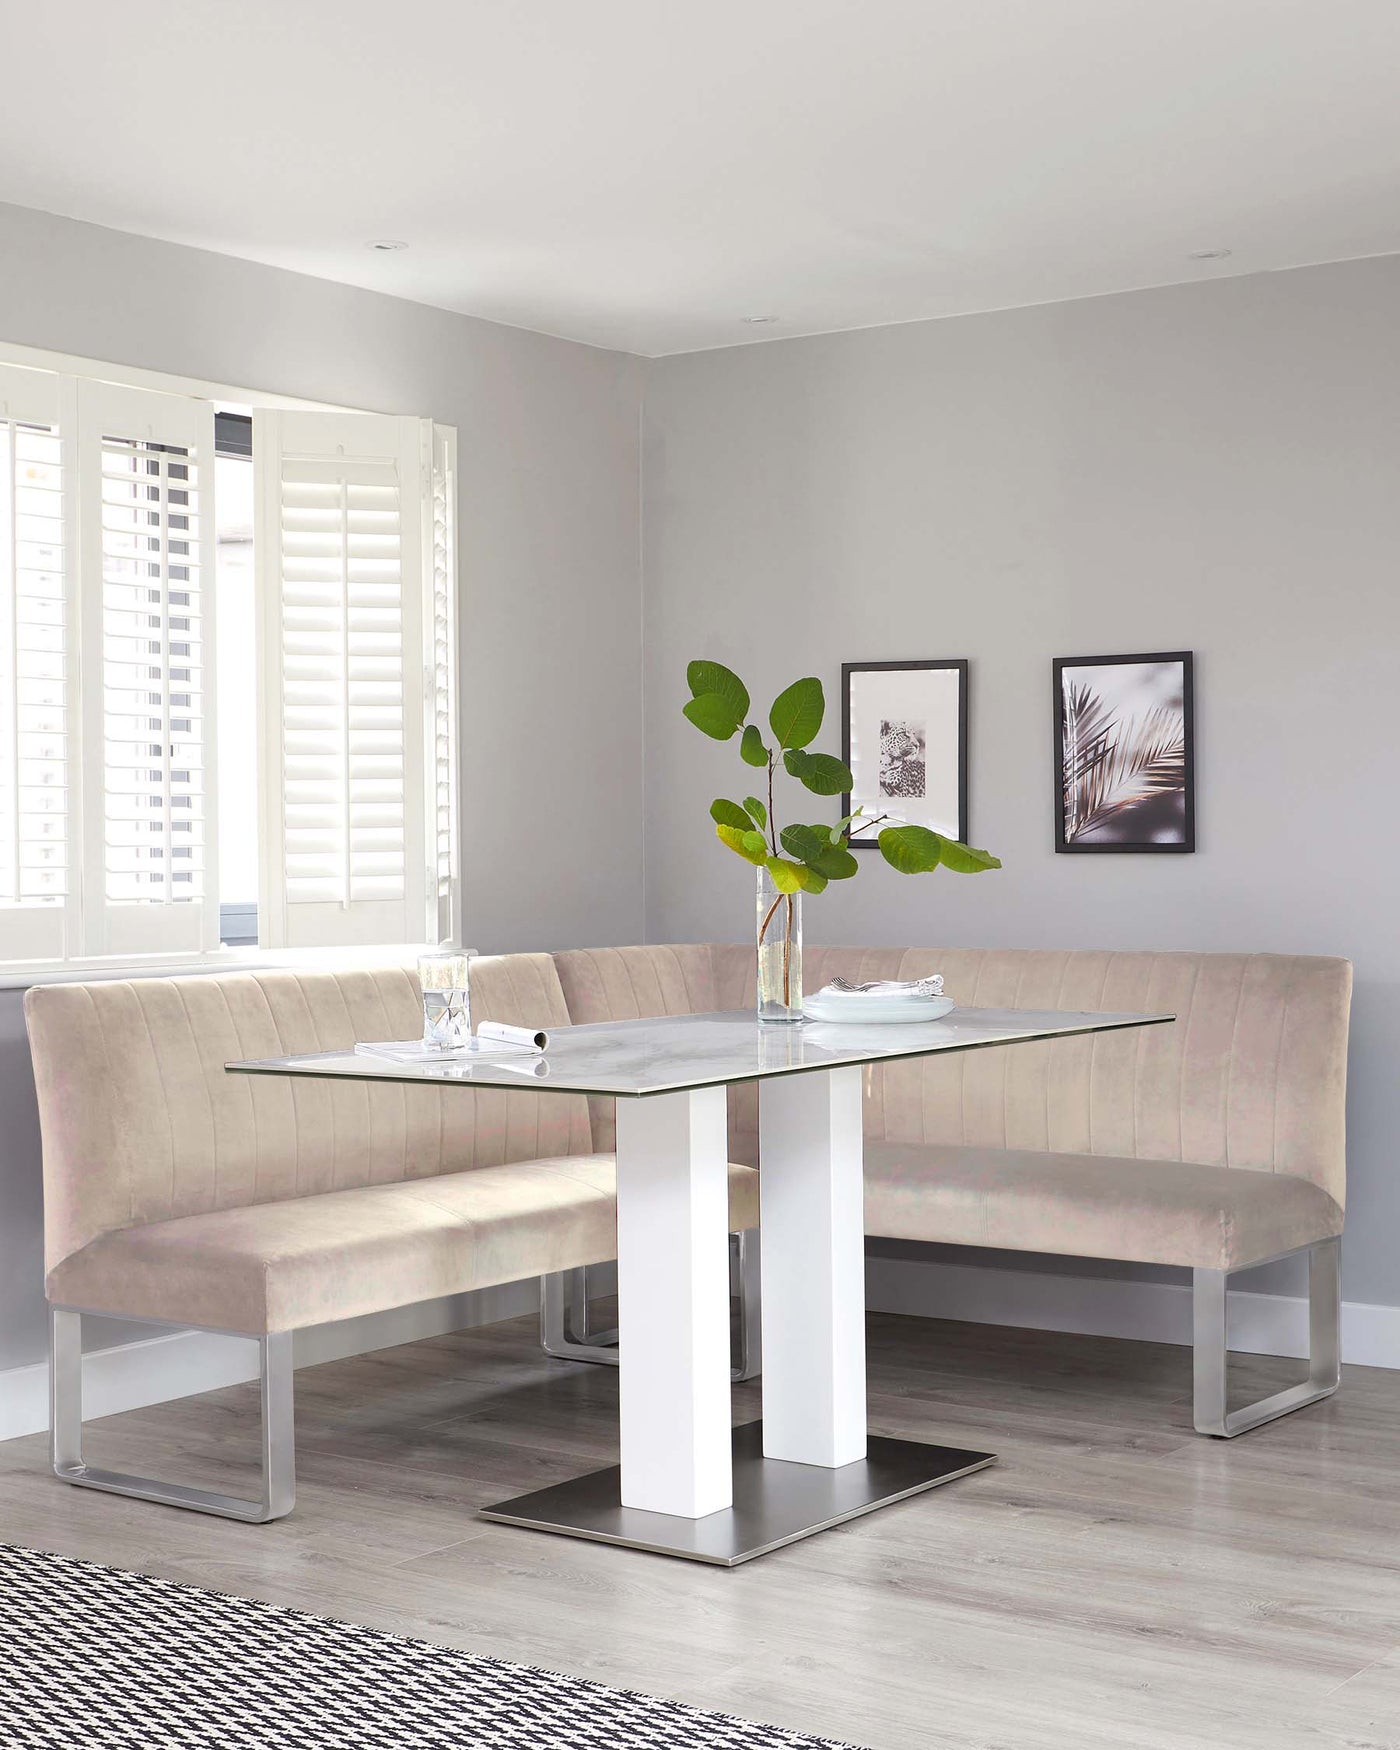 Modern dining room setup featuring a rectangular glass-top table with white and stainless steel legs, complemented by a matching L-shaped plush beige bench with back support, set against a neutral interior decor with wooden flooring.